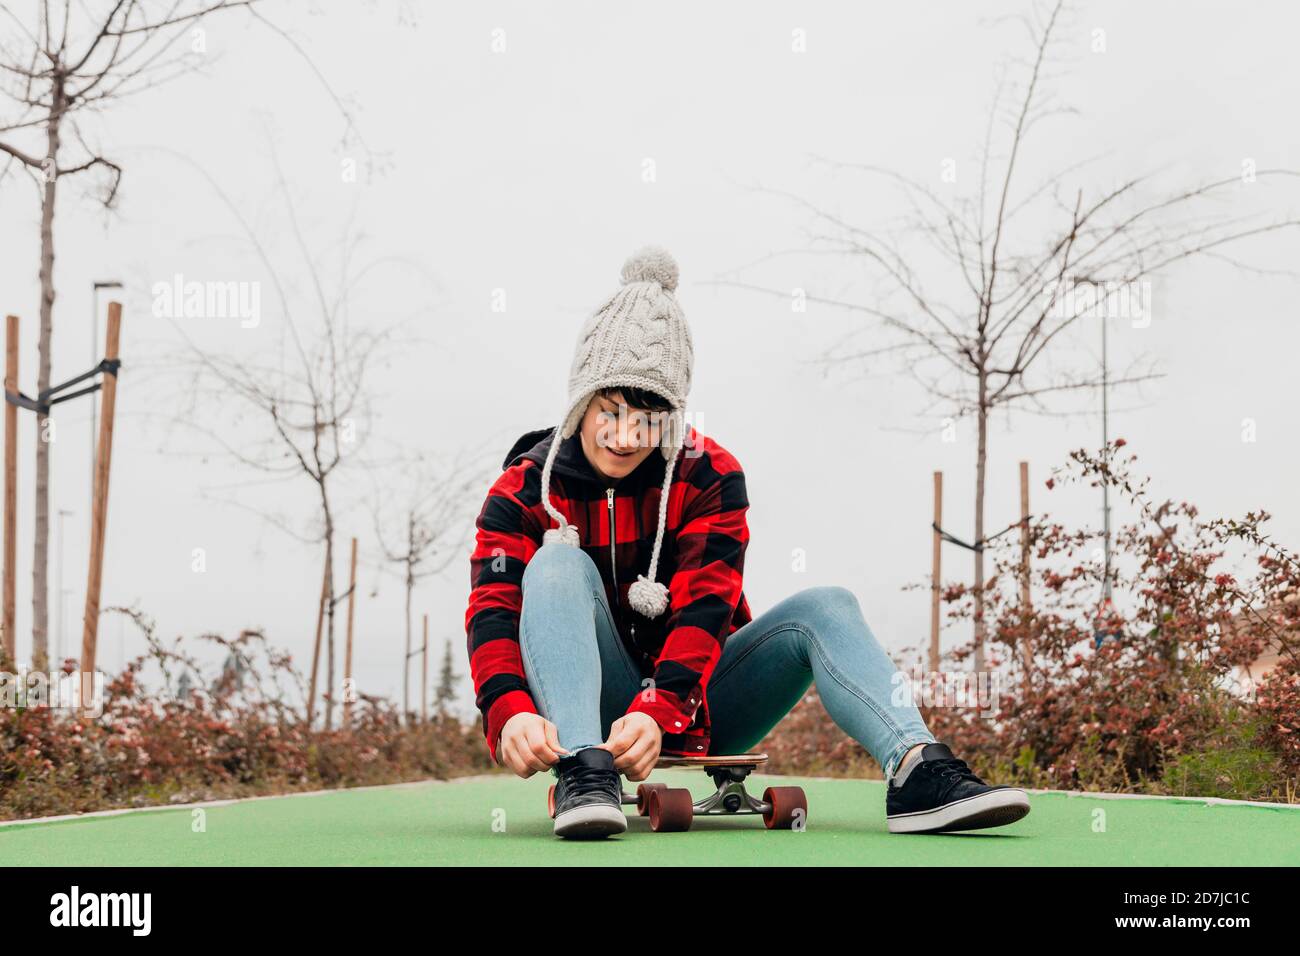 Young woman tying shoelace while sitting on skateboard Stock Photo